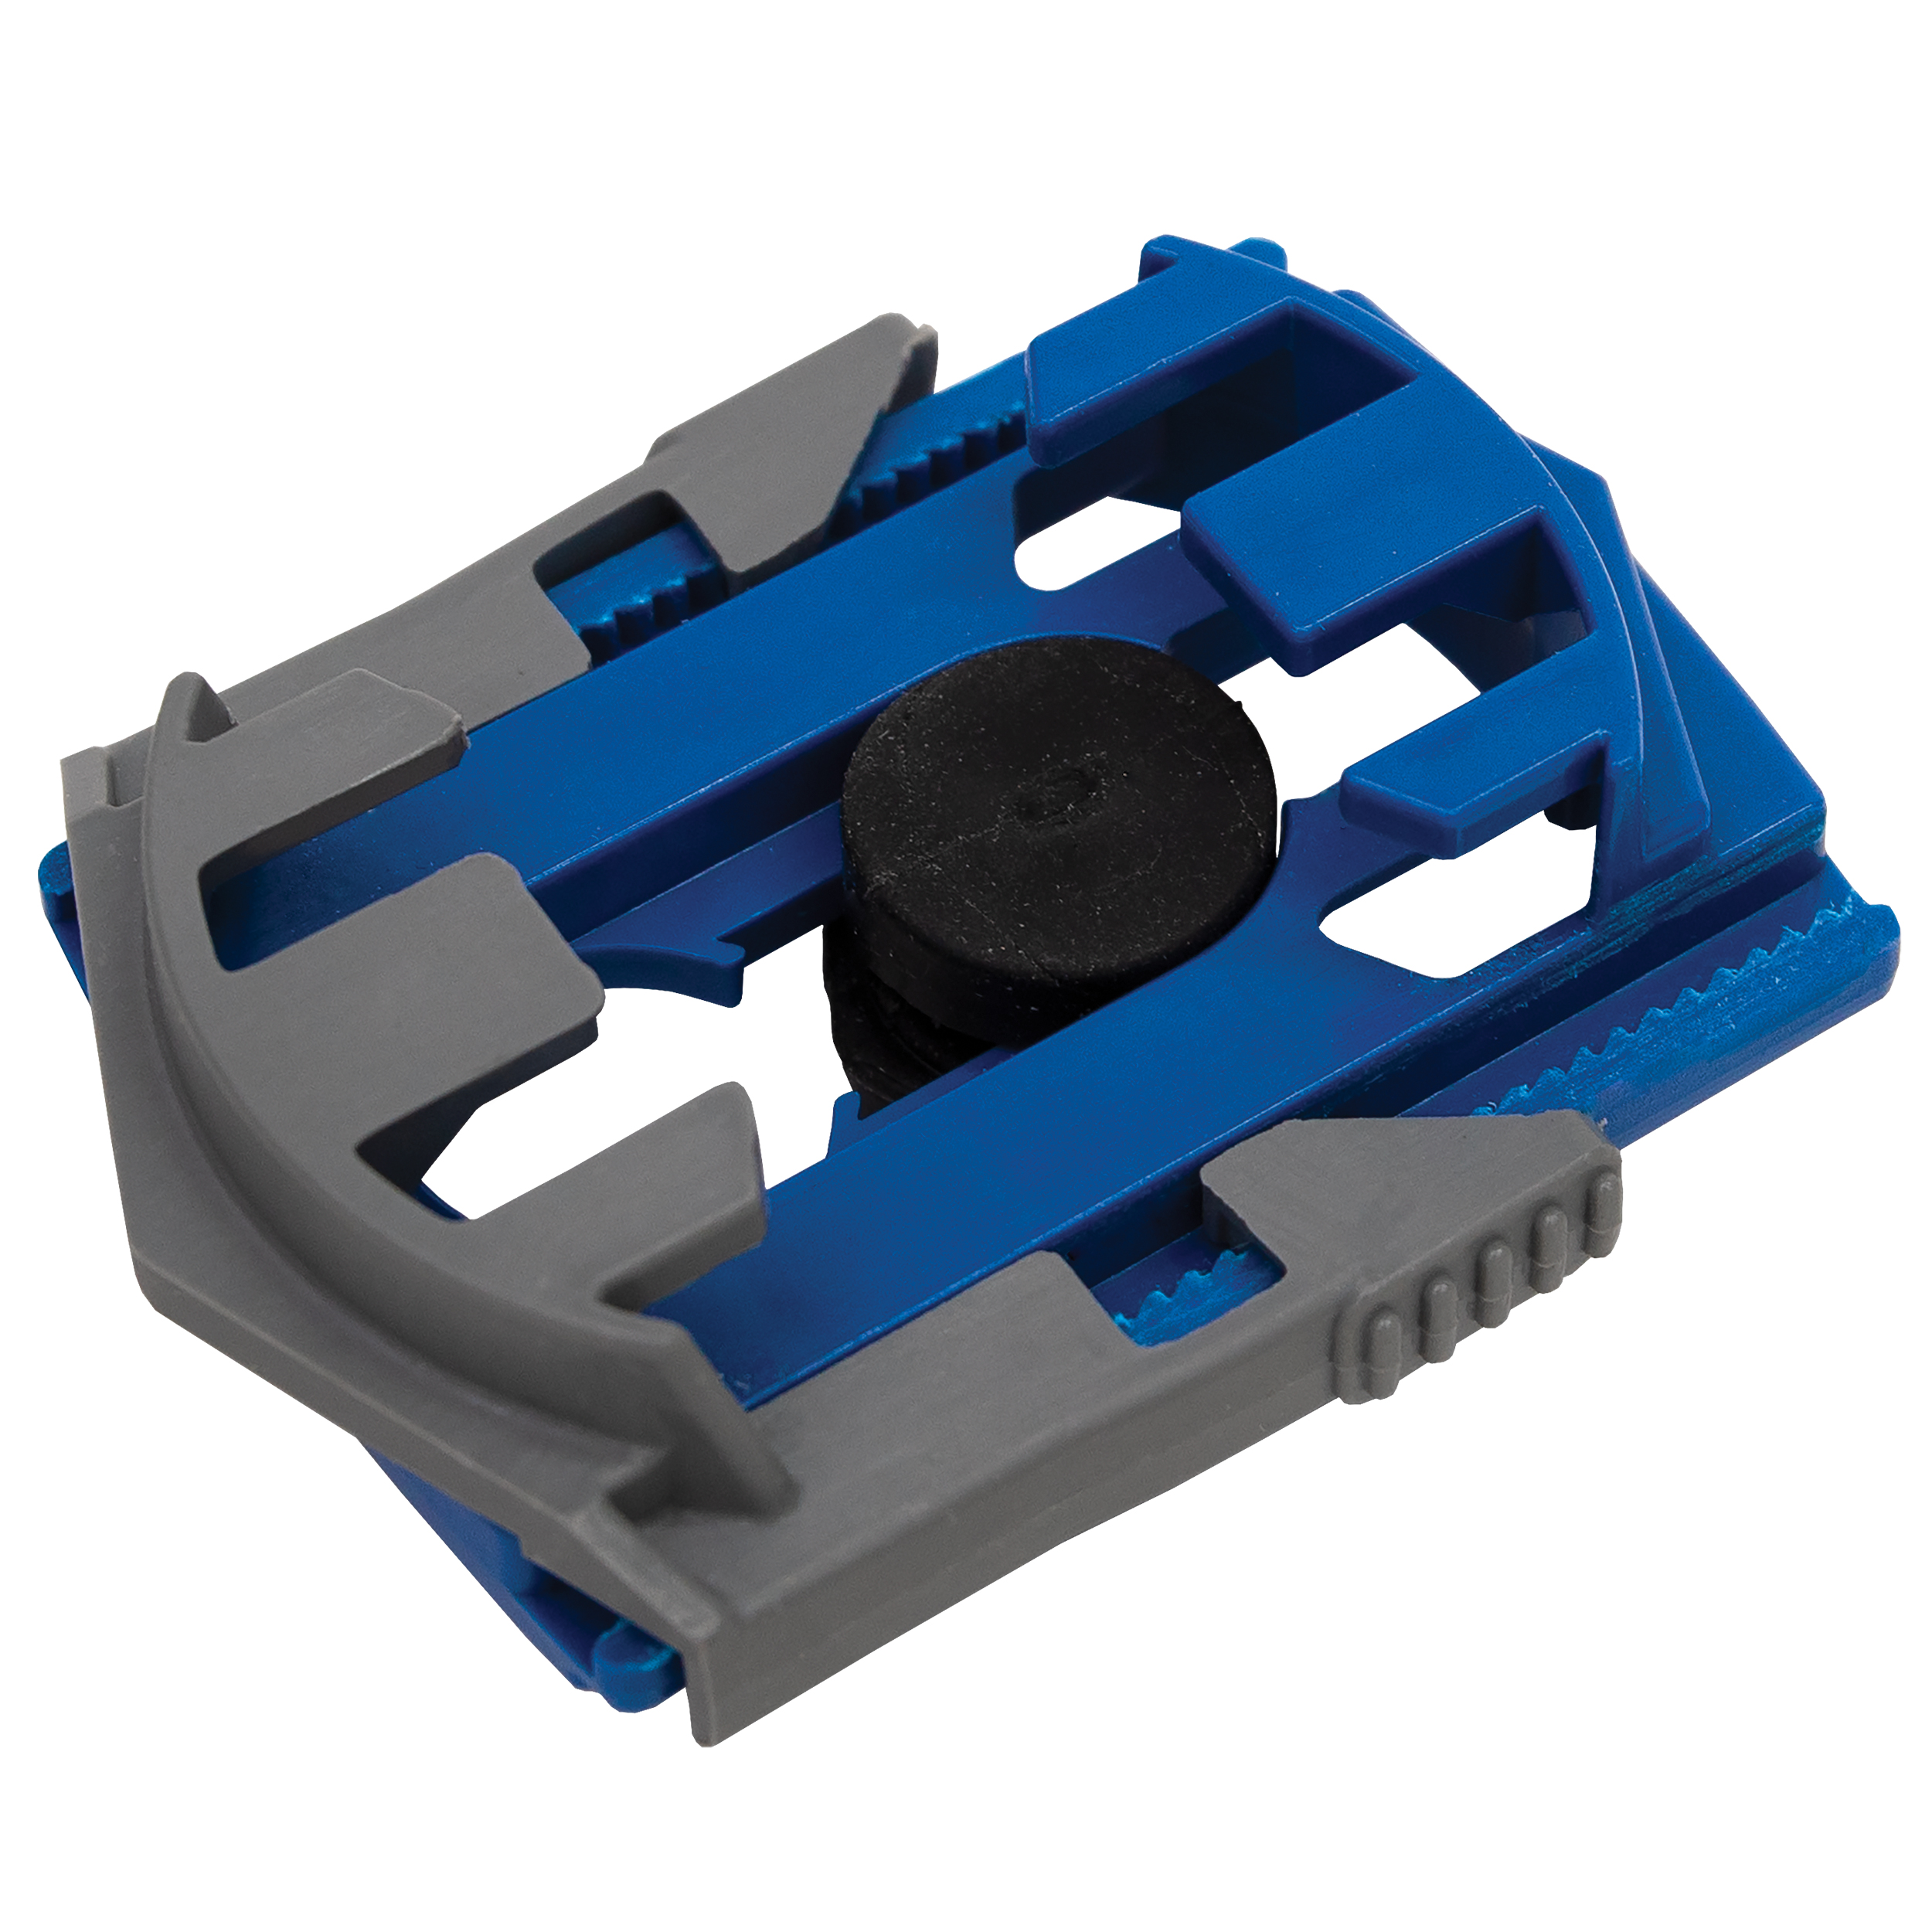 Pocket-hole Jig Universal Clamp Adapter